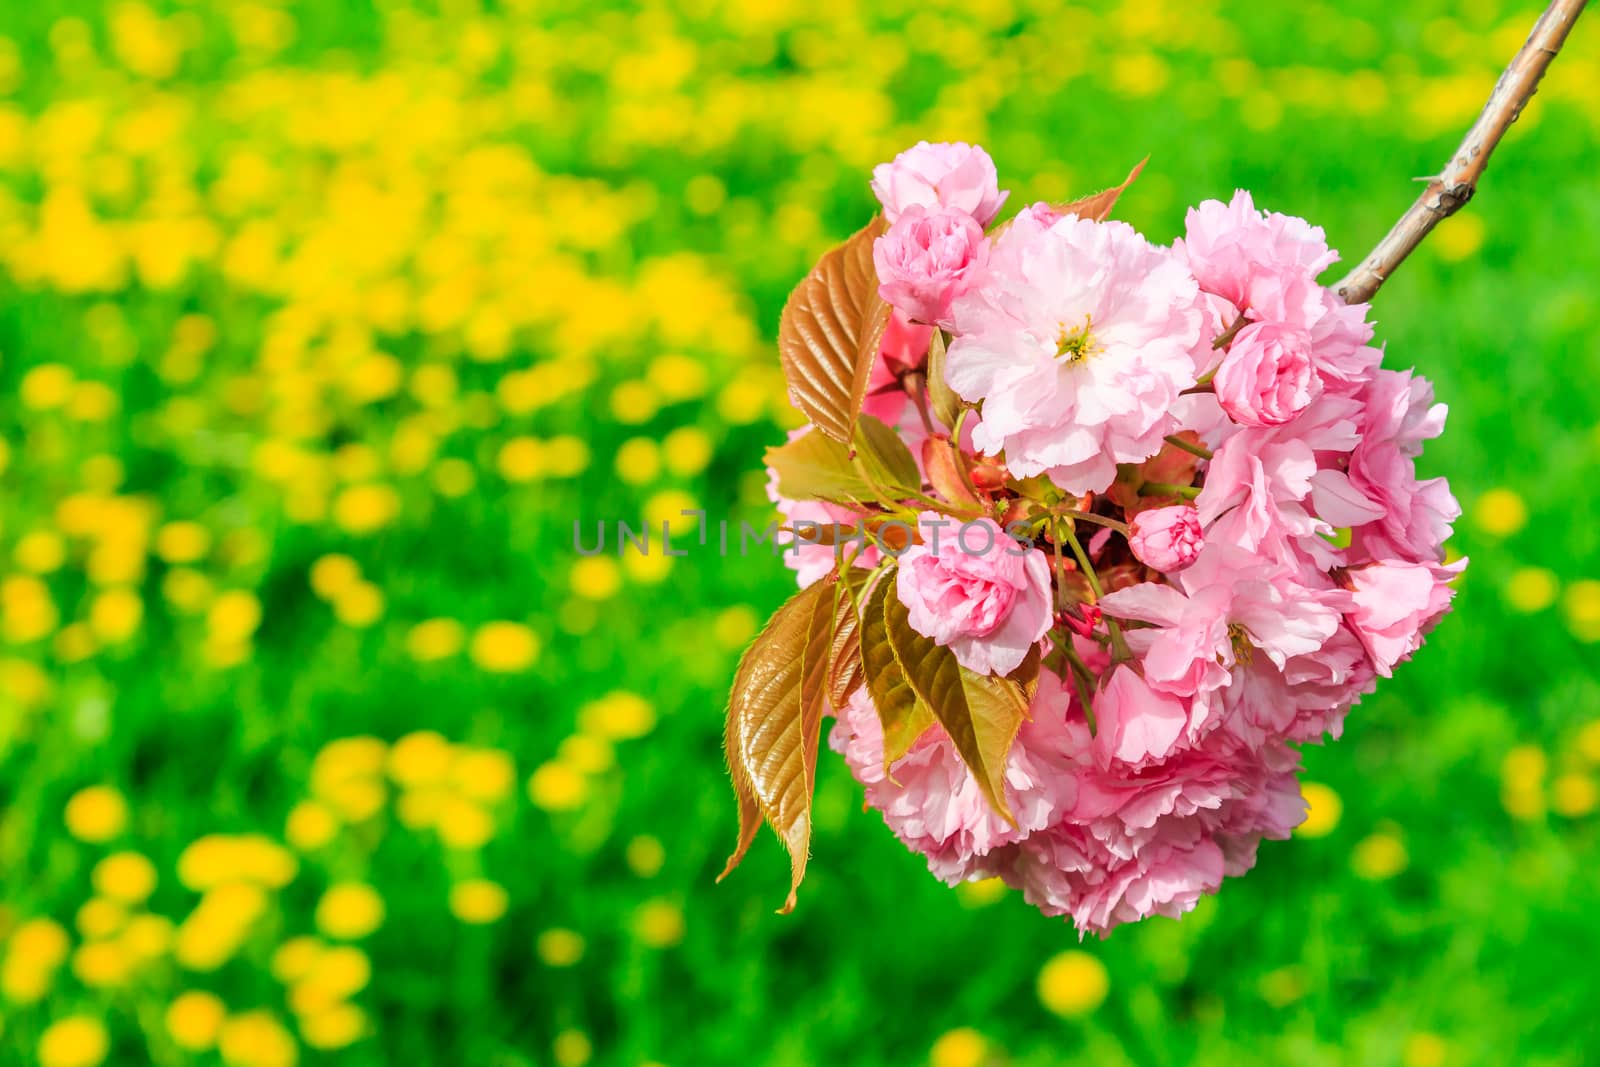 bud Sakura flowers on blurred background of green grass and yell by Pellinni